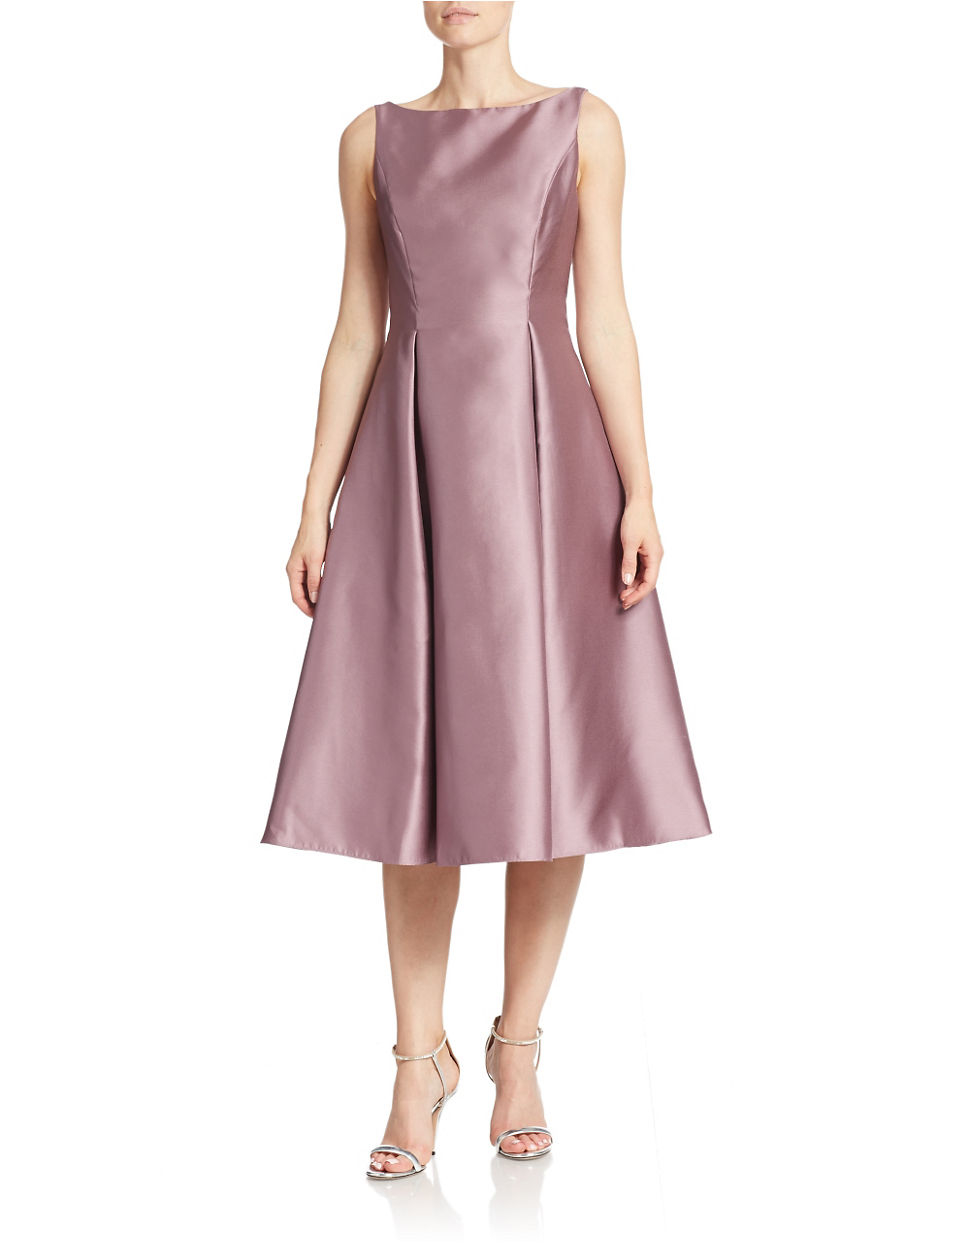 Adrianna Papell Tea-length Fit-and-flare Dress in Pink - Lyst